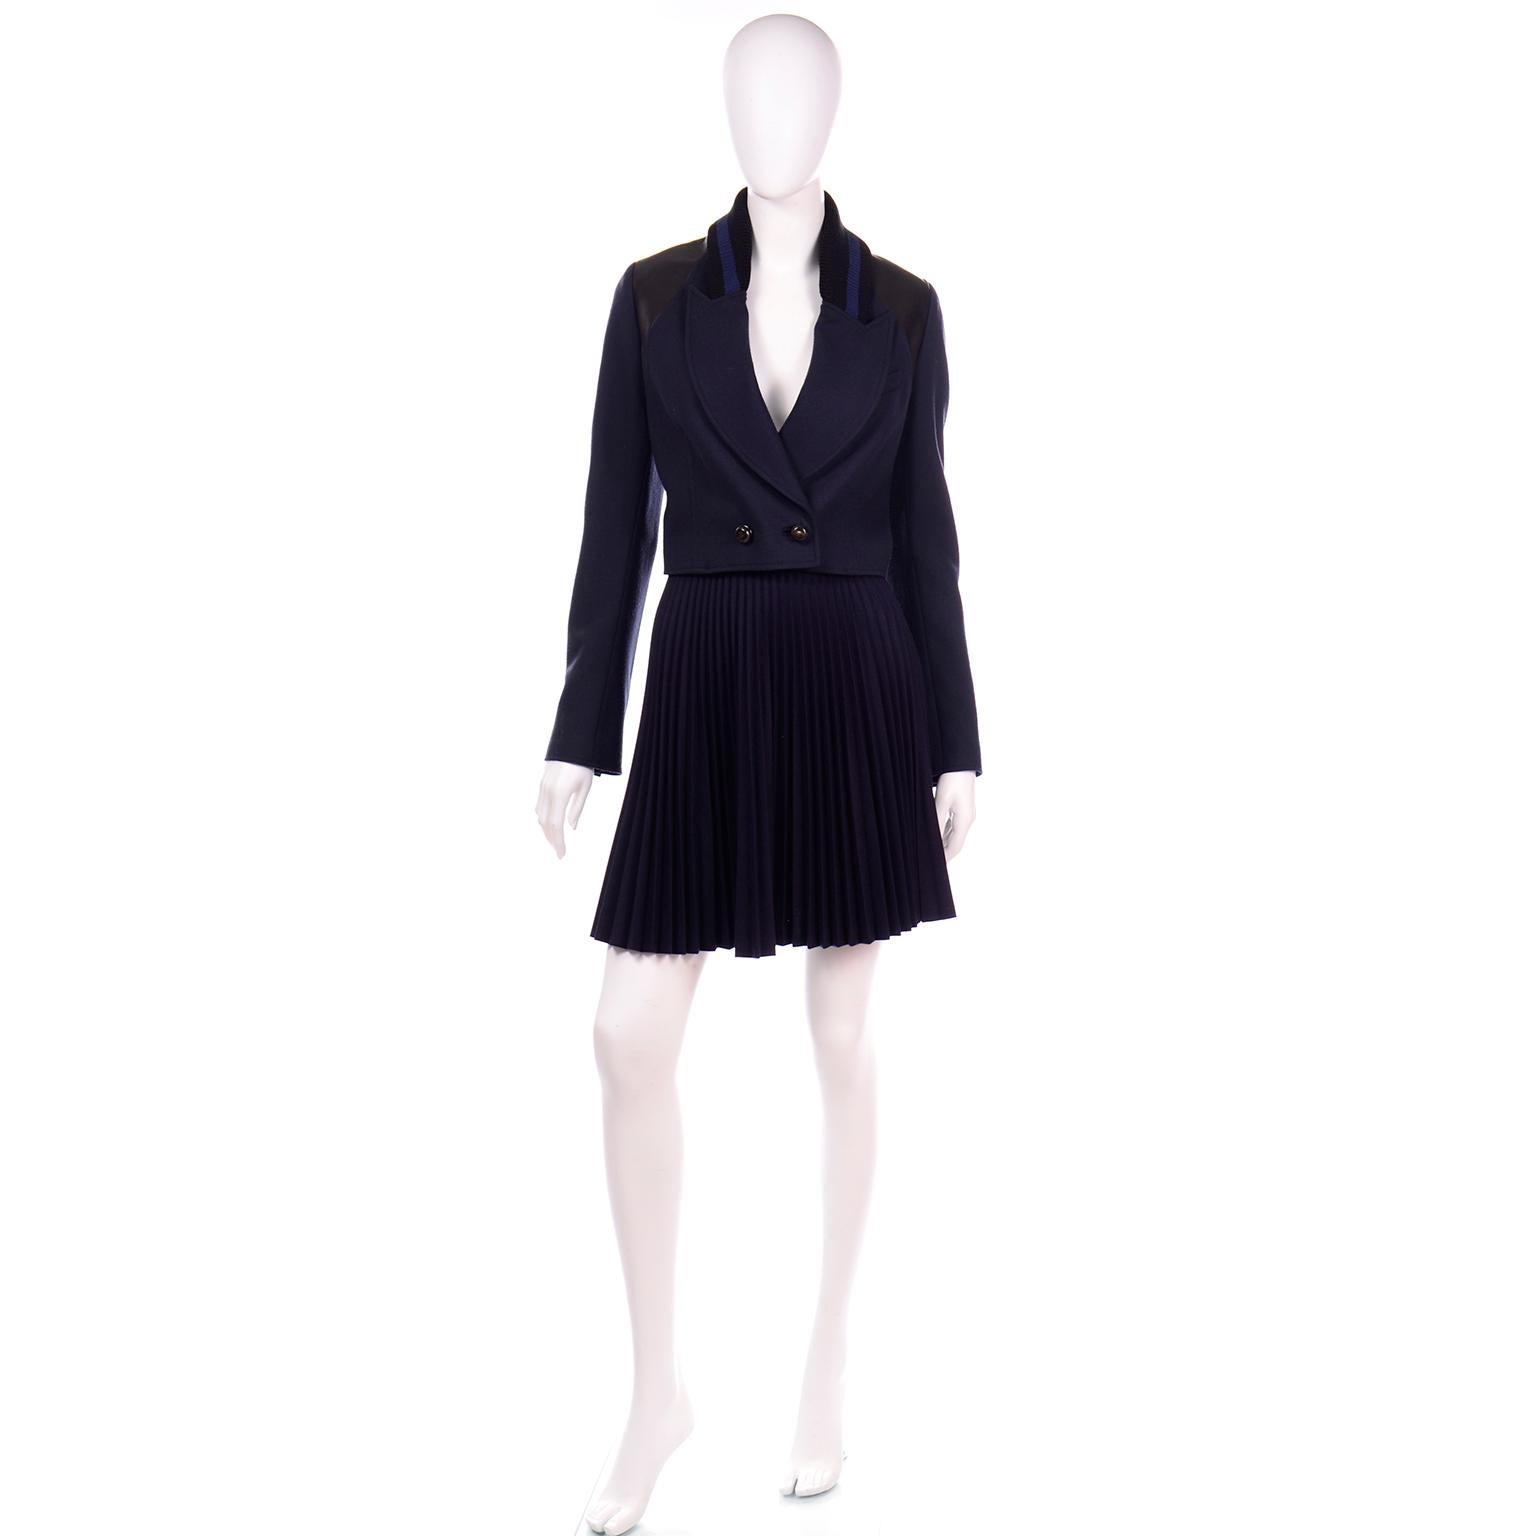 This is a great Proenza Schouler 2 piece suit with a cropped varsity style blazer jacket and an accordian pleated skirt. The jacket has a navy and black ribbed knit collar with a pointed notch collar with a single breast pocket. The shoulders have